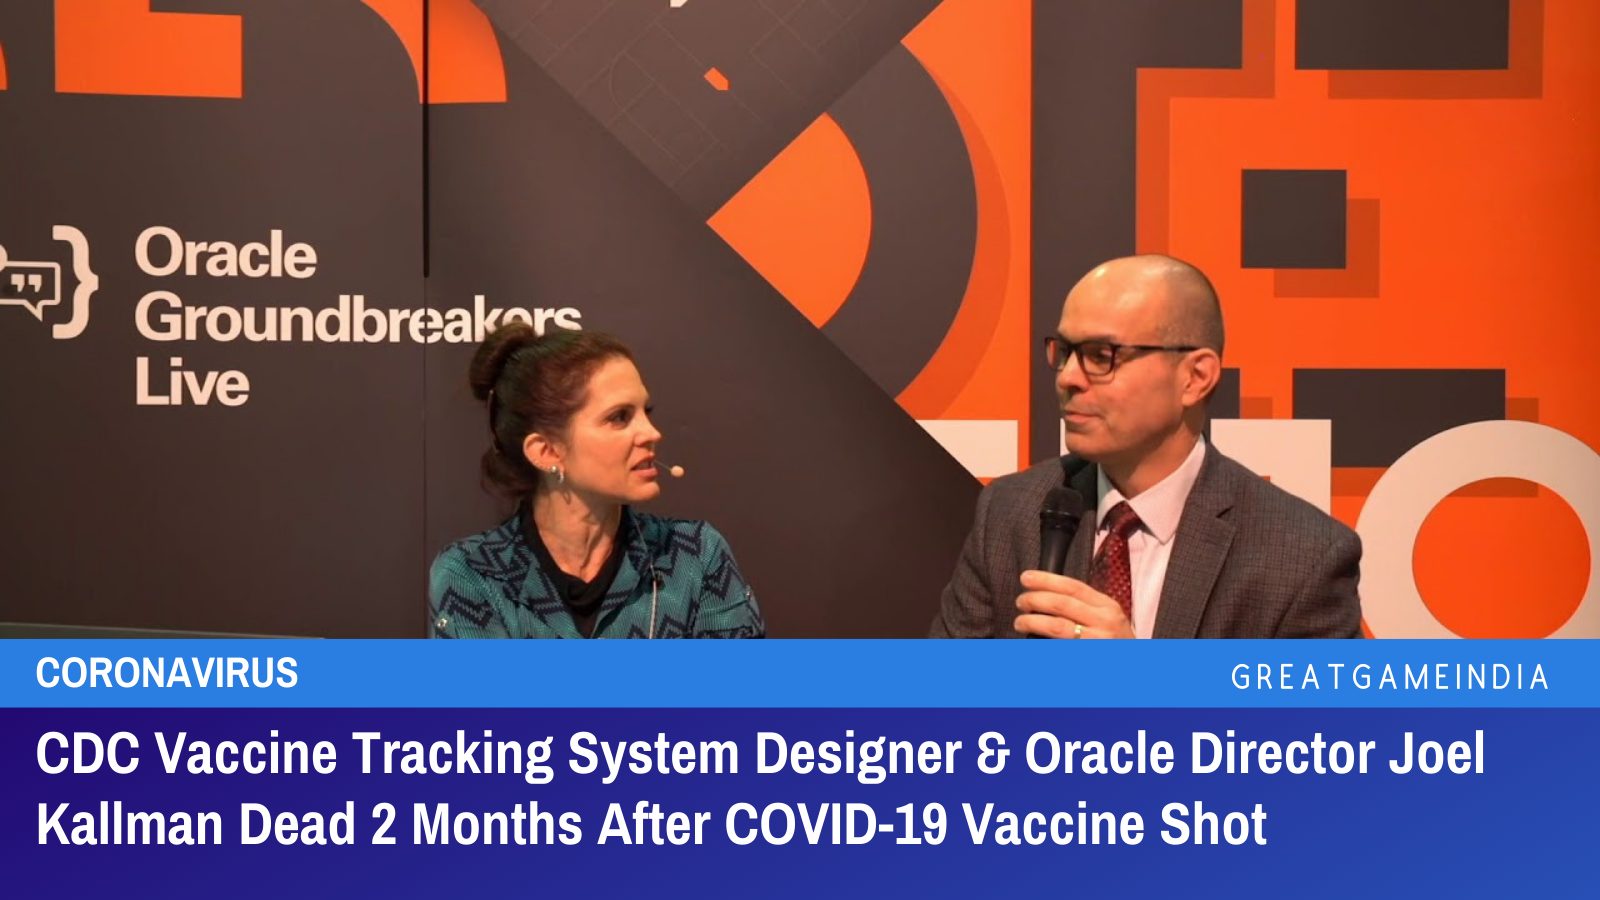 CDC Vaccine Tracking System Designer & Oracle Director Joel Kallman Dead 2 Months After COVID-19 Vaccine Shot